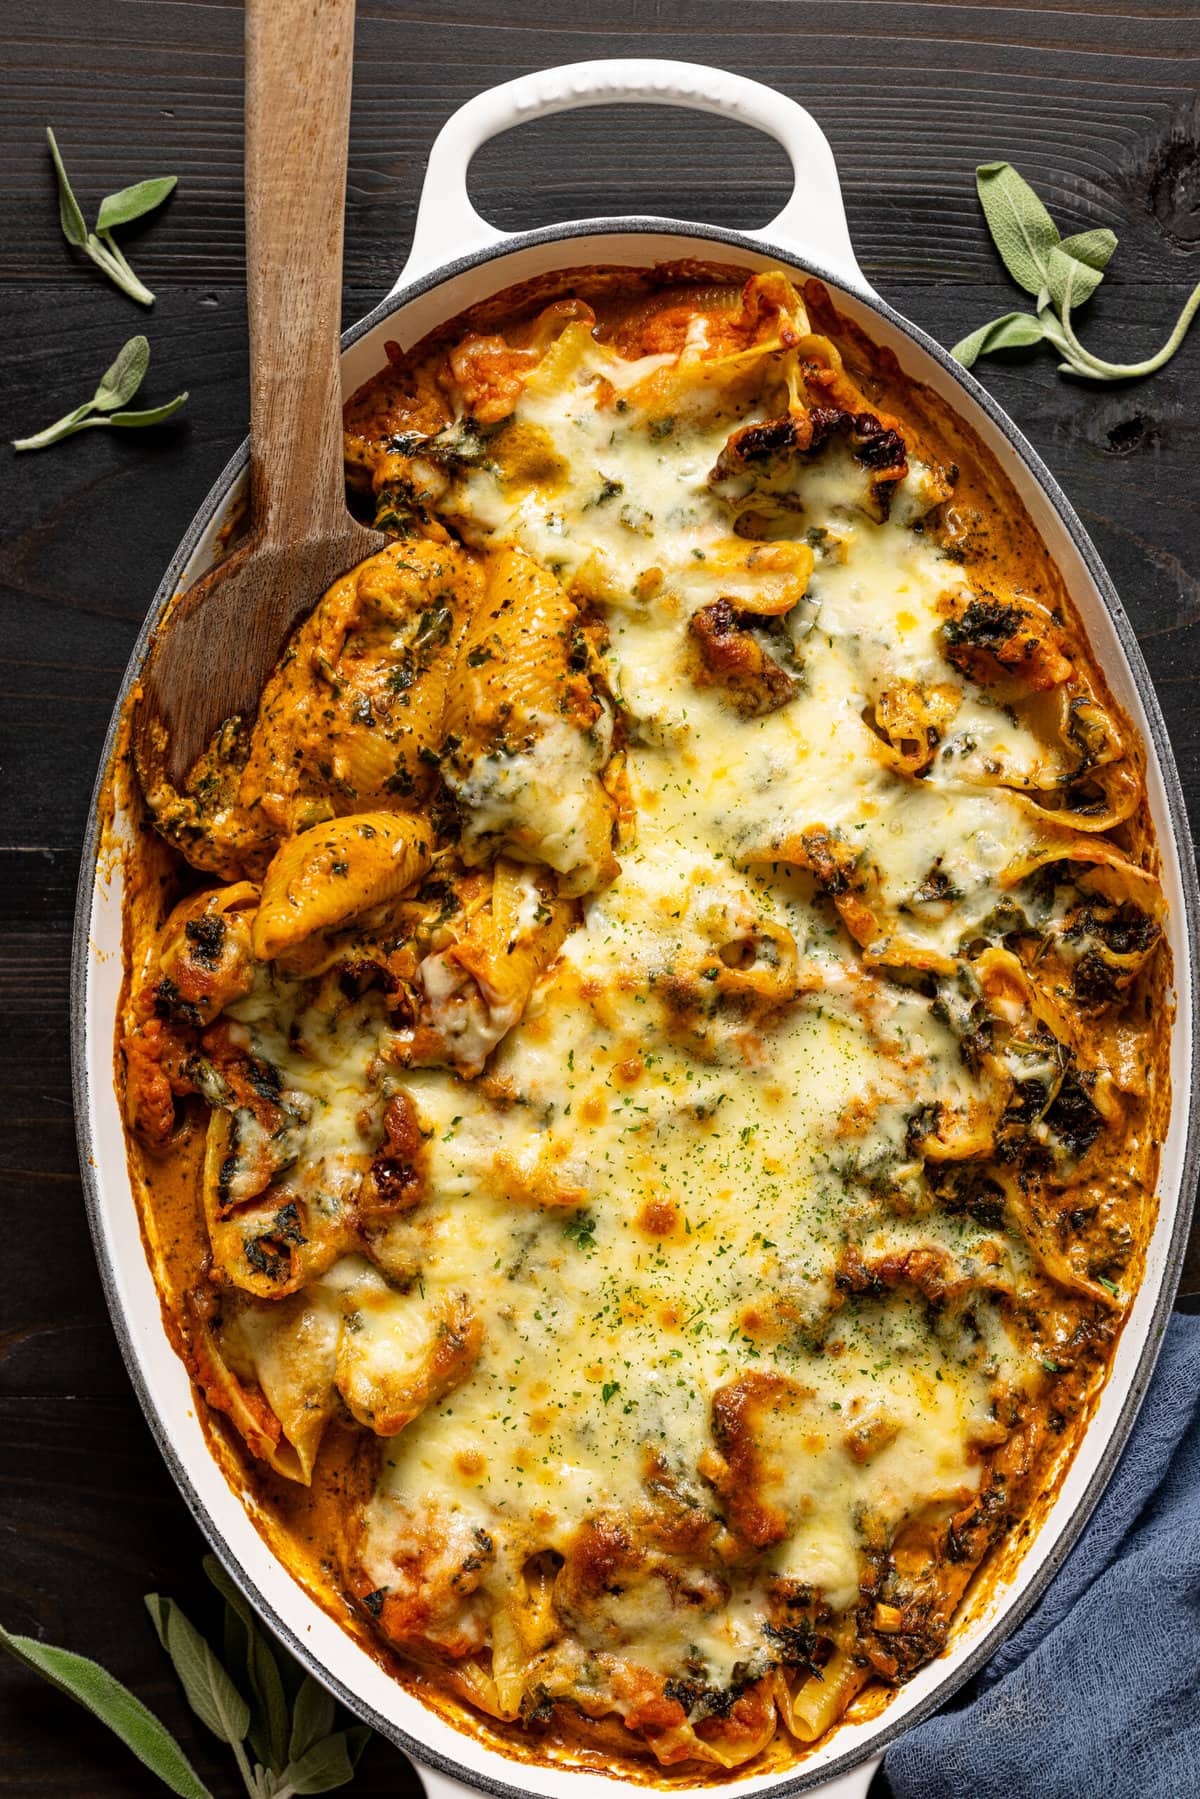 Stuffed baked shells in a baking dish with wooden spoon.